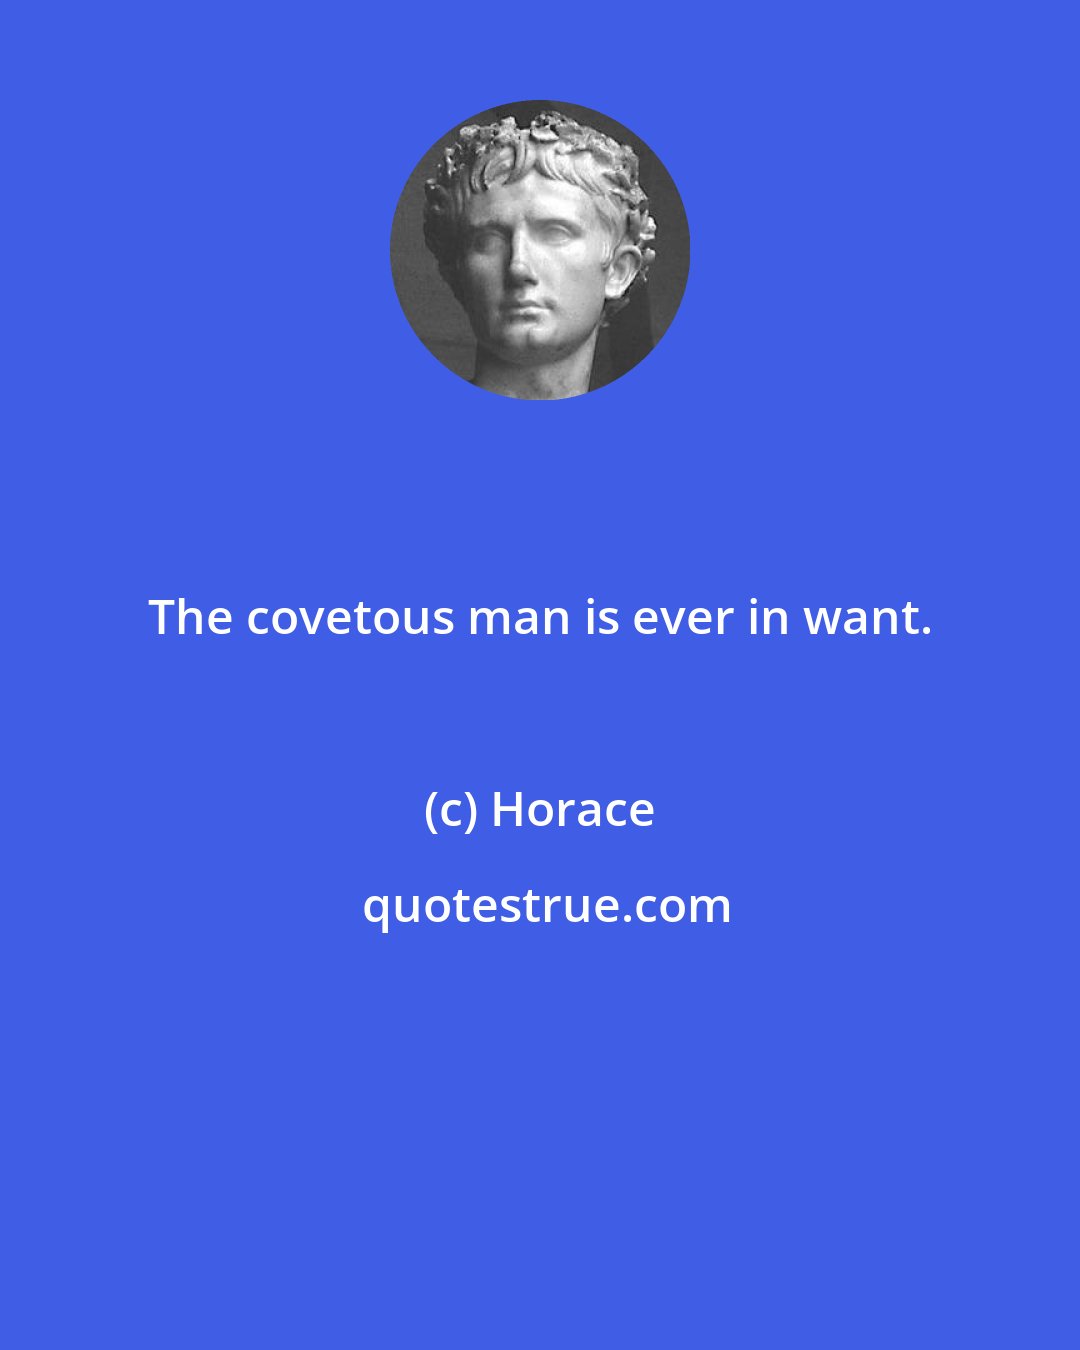 Horace: The covetous man is ever in want.